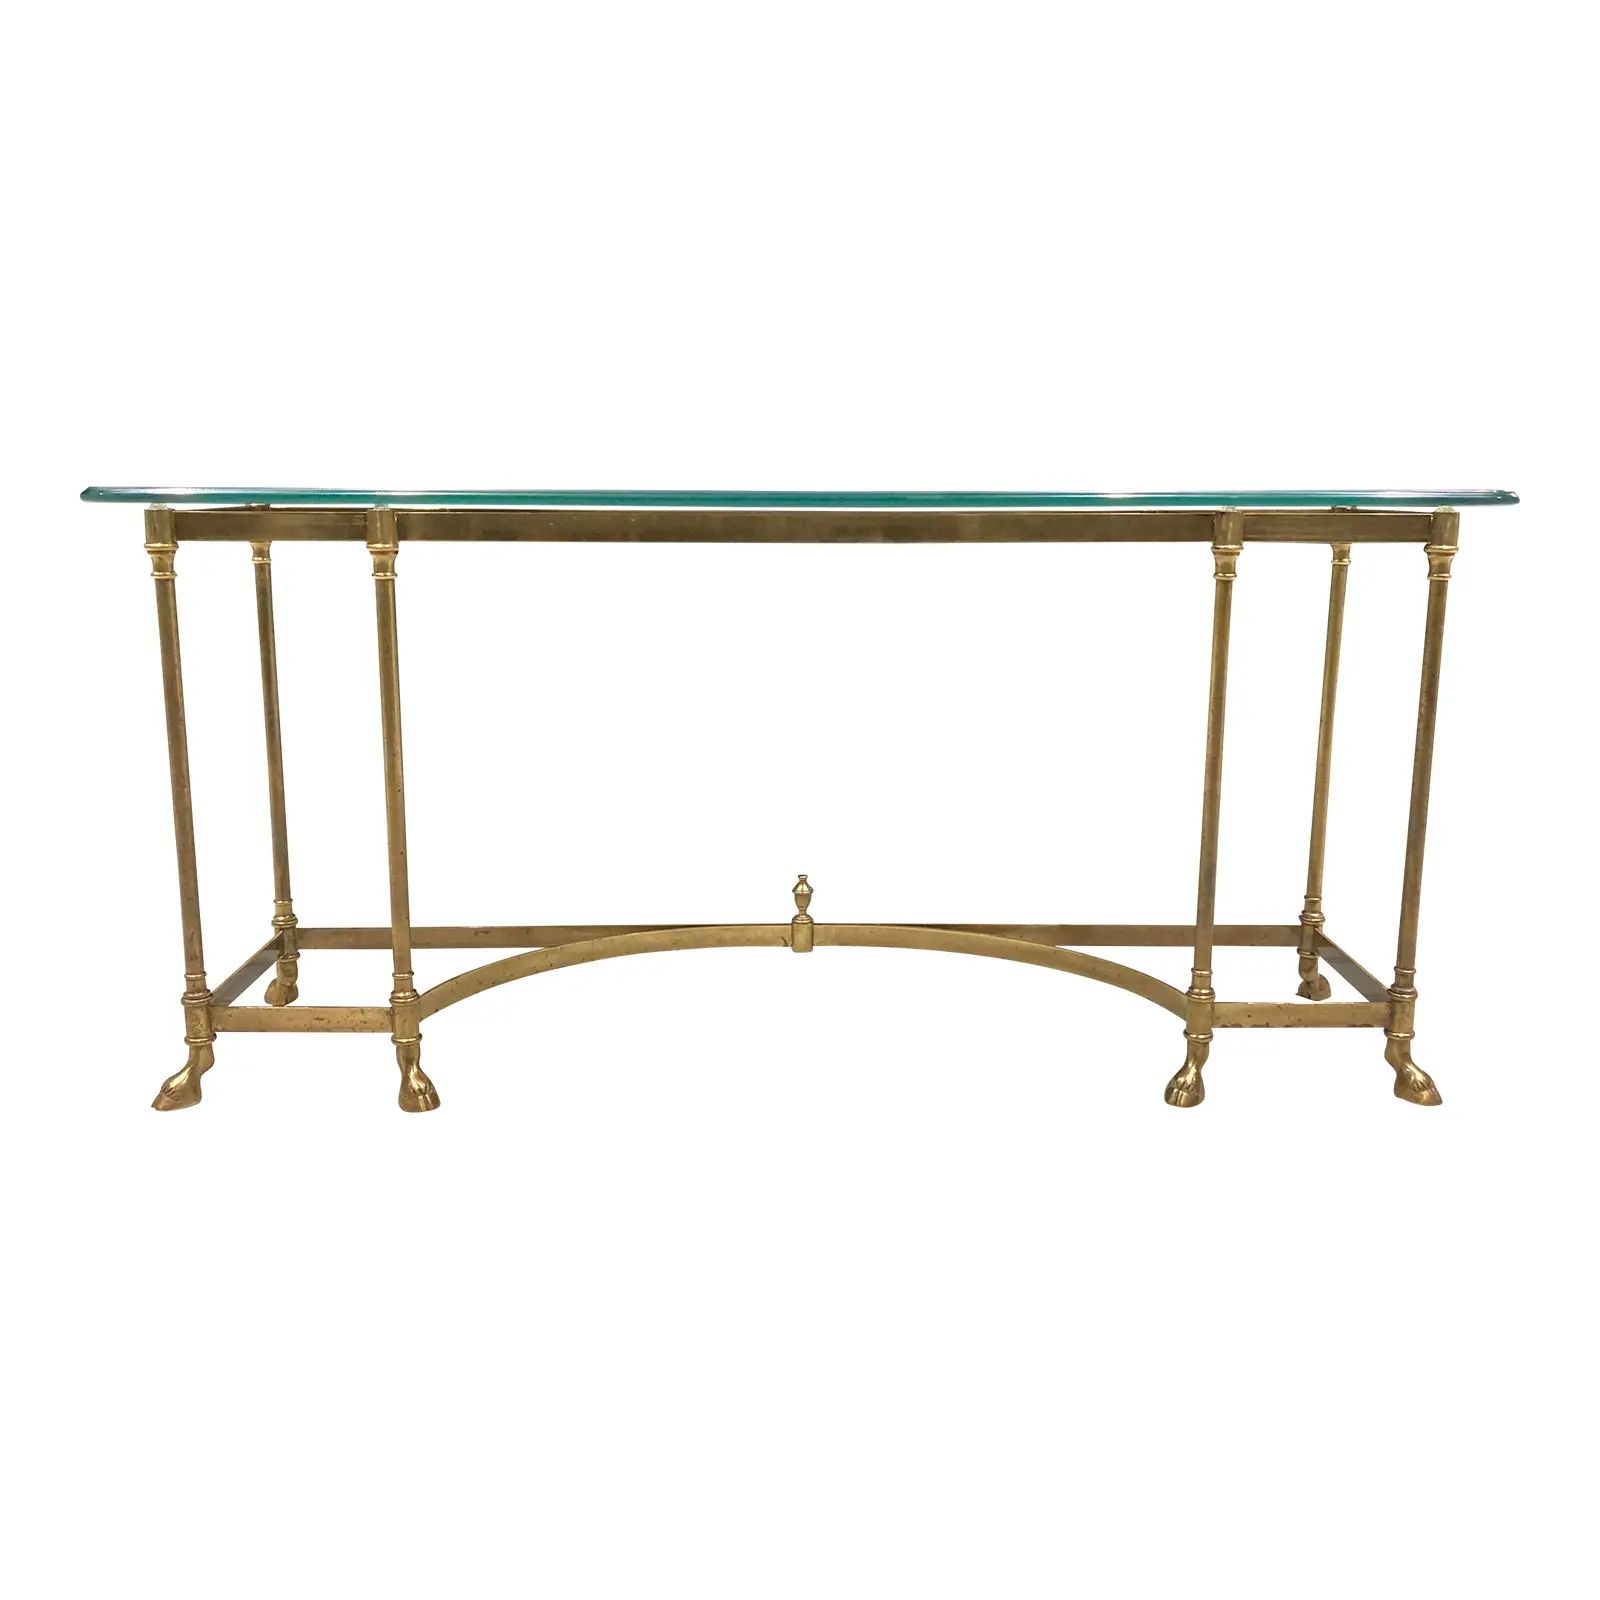 Brass Hoofed Foot Thick Glass Top Console Table Manner of Jansen | Chairish